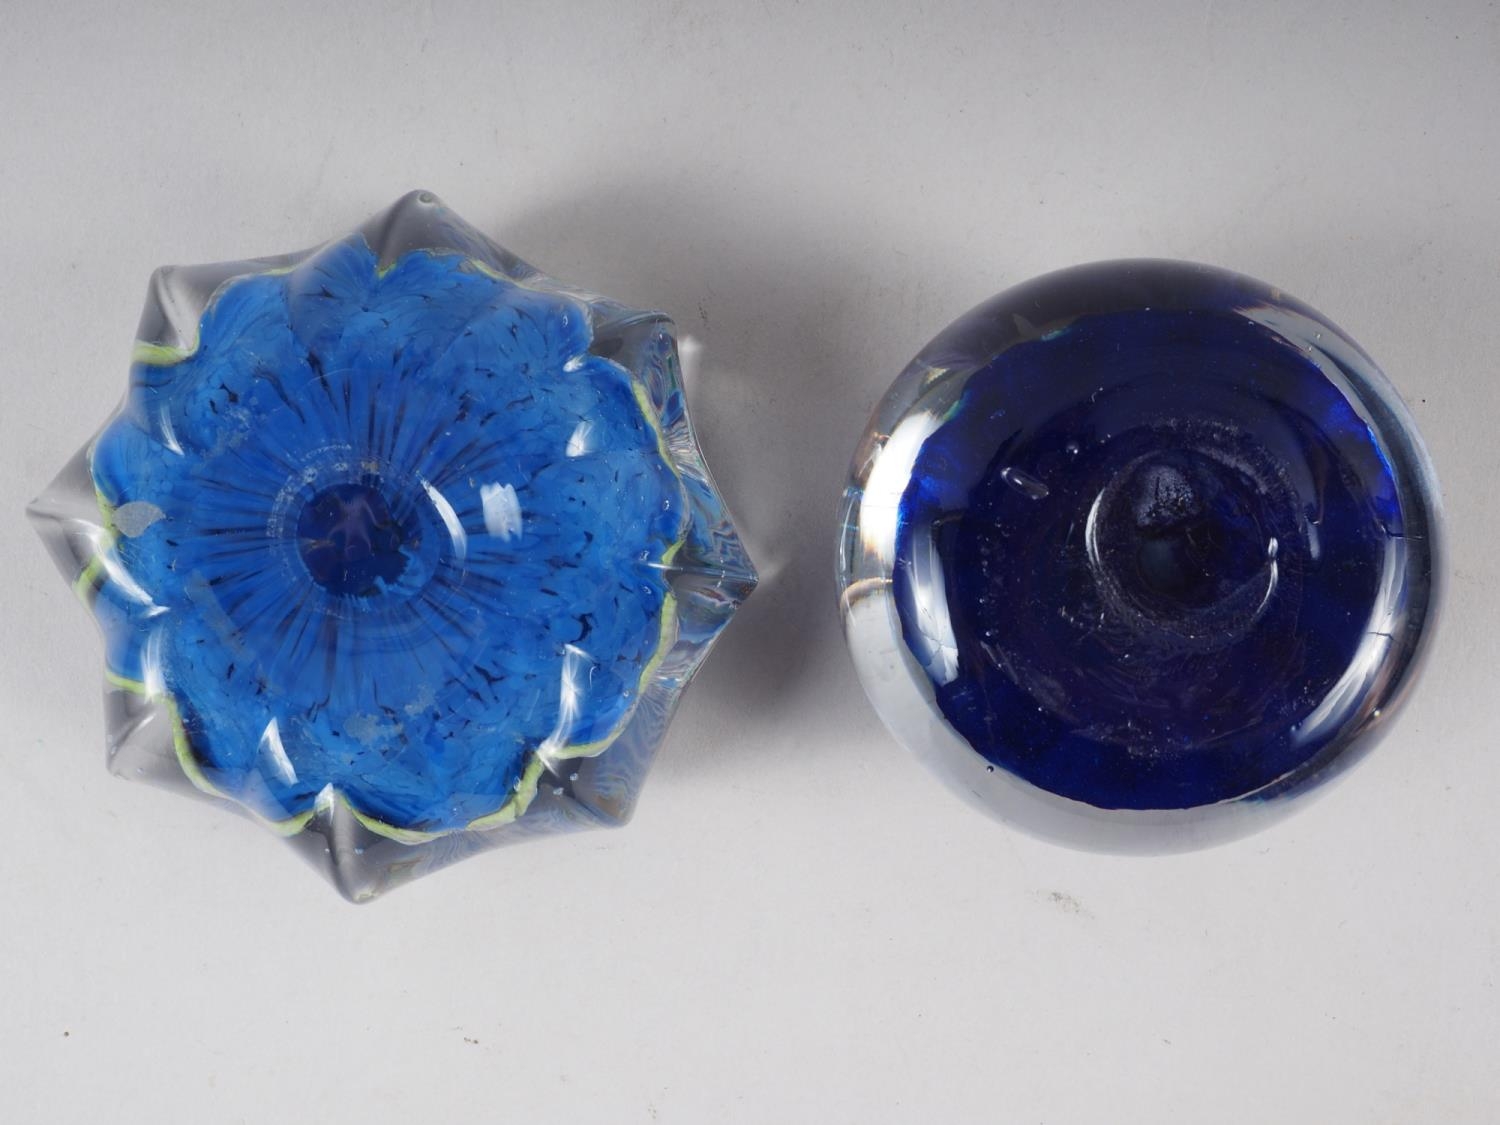 A Strathearn type star shape paperweight with radiant canes, 3" wide, and a similar paperweight, 2 - Image 2 of 6